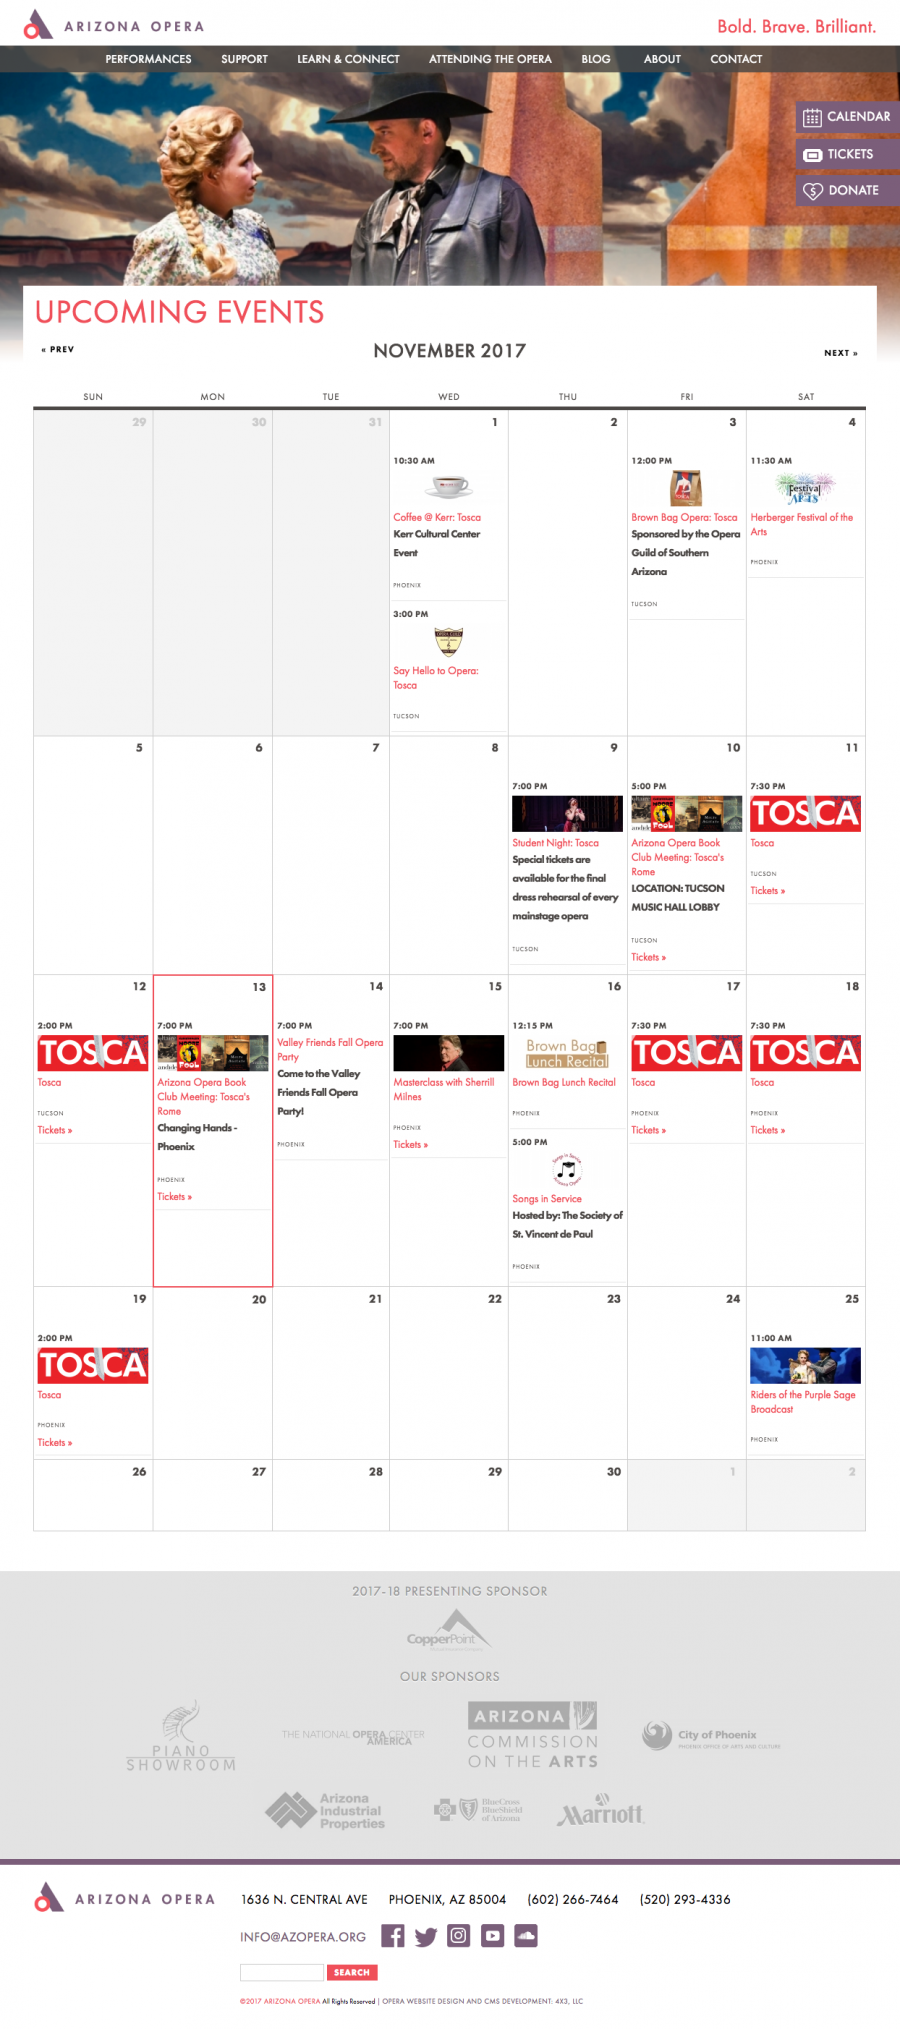 Arizona Opera Calendar Landing Page for Upcoming Events and Performances 